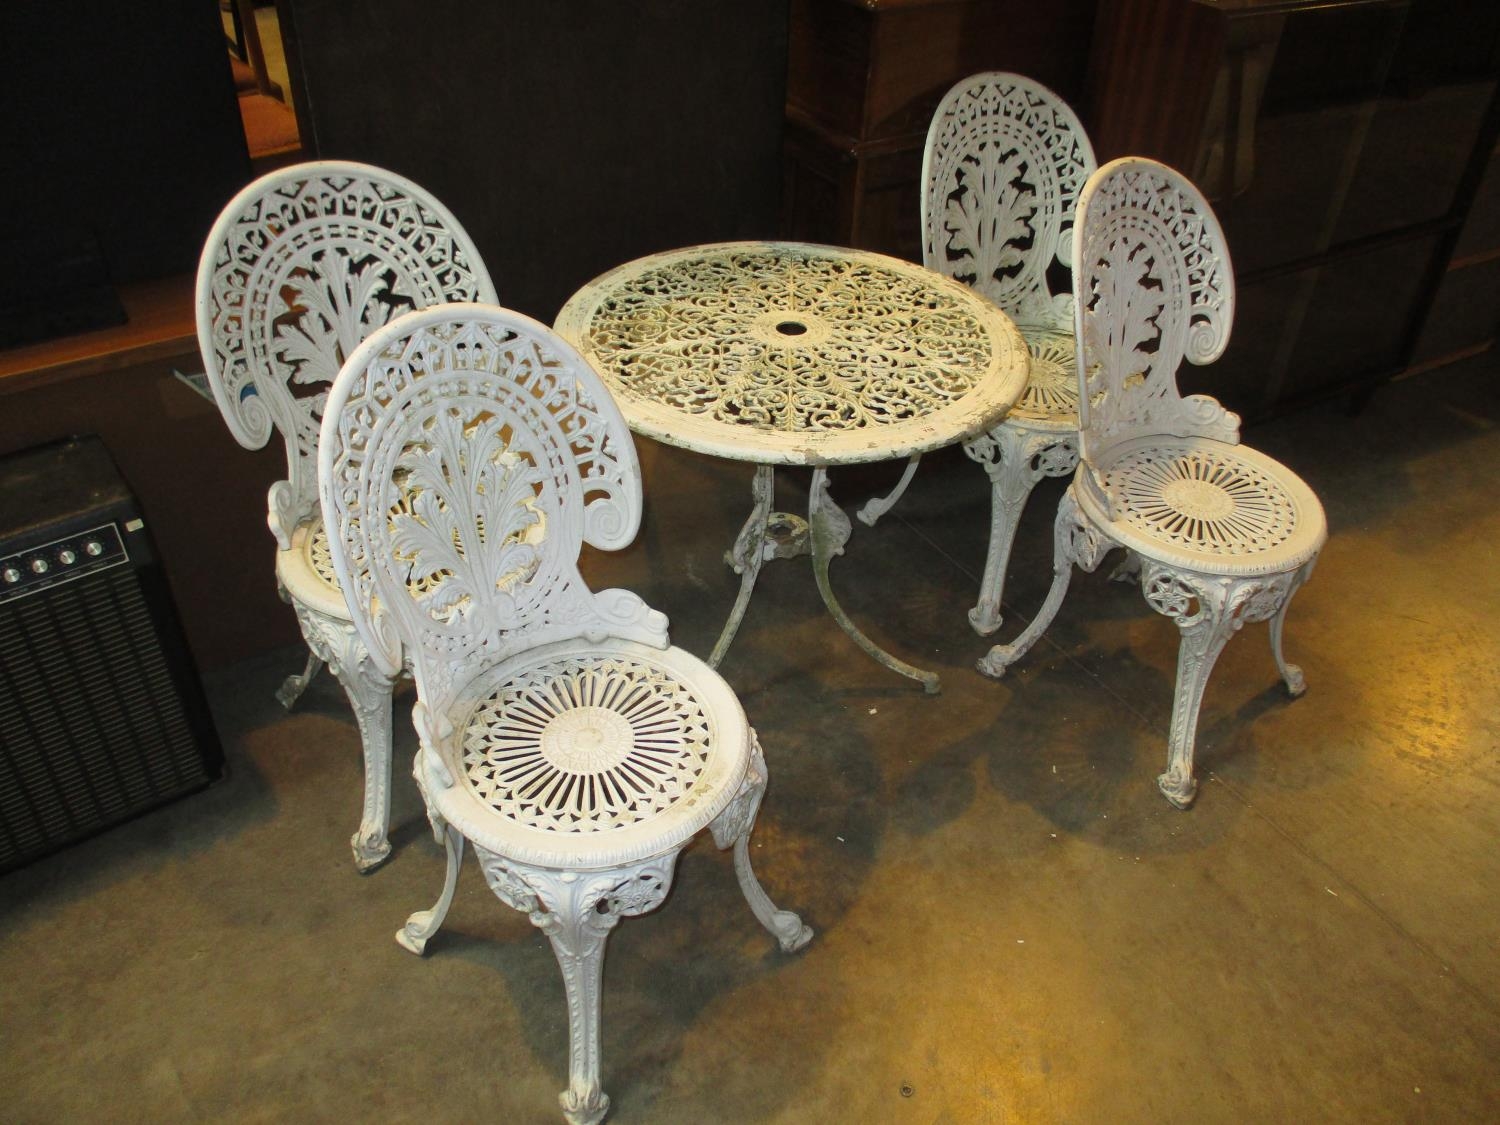 Cast Metal Garden Table with 4 Chairs